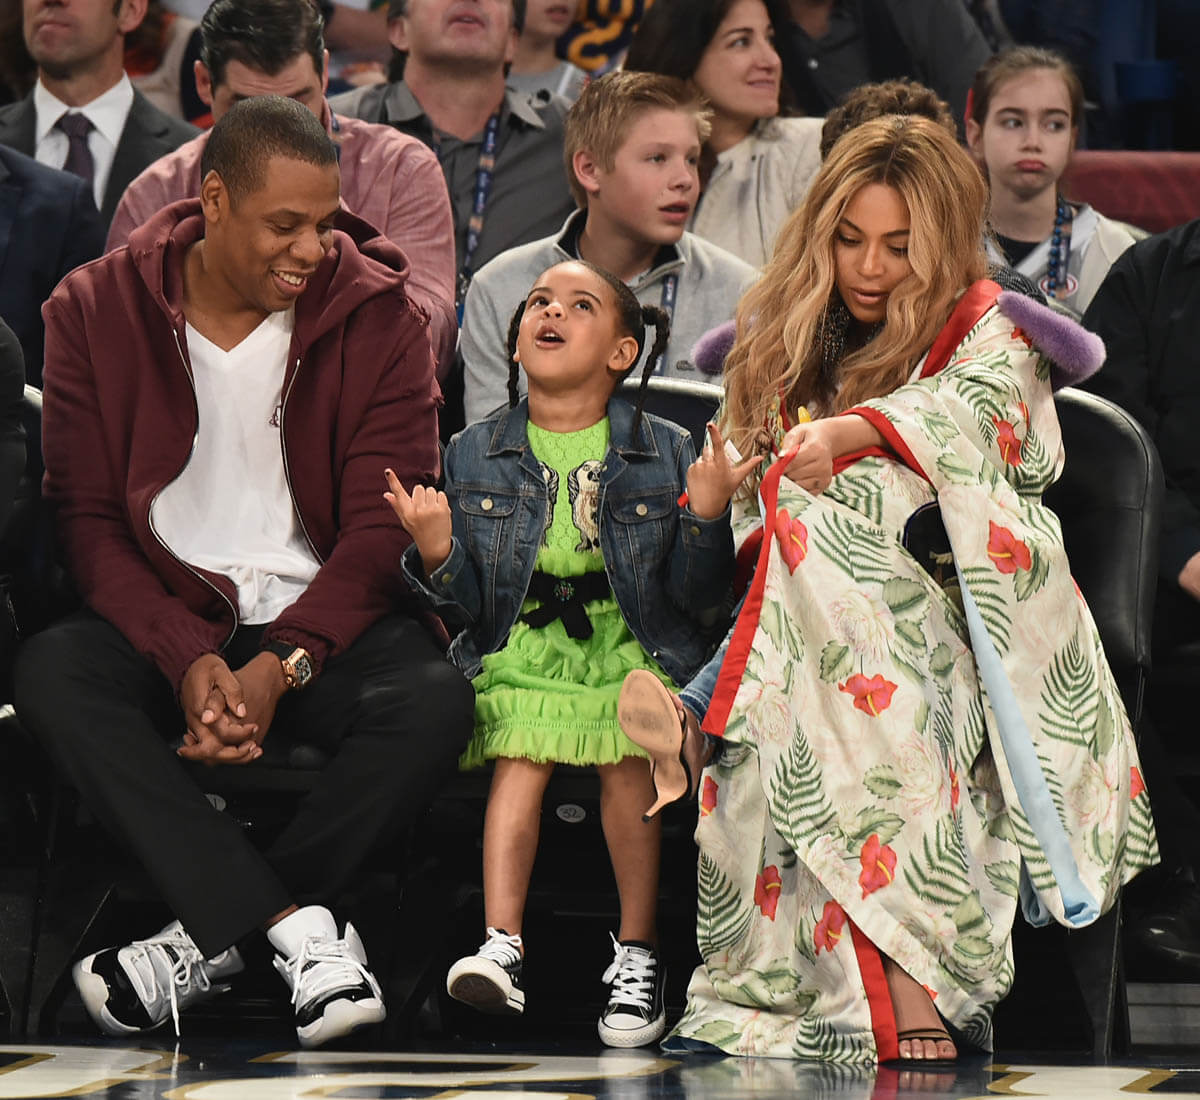 Beyoncé, Jay Z, and Blue Ivy in New Orleans at the NBA All-Star Game